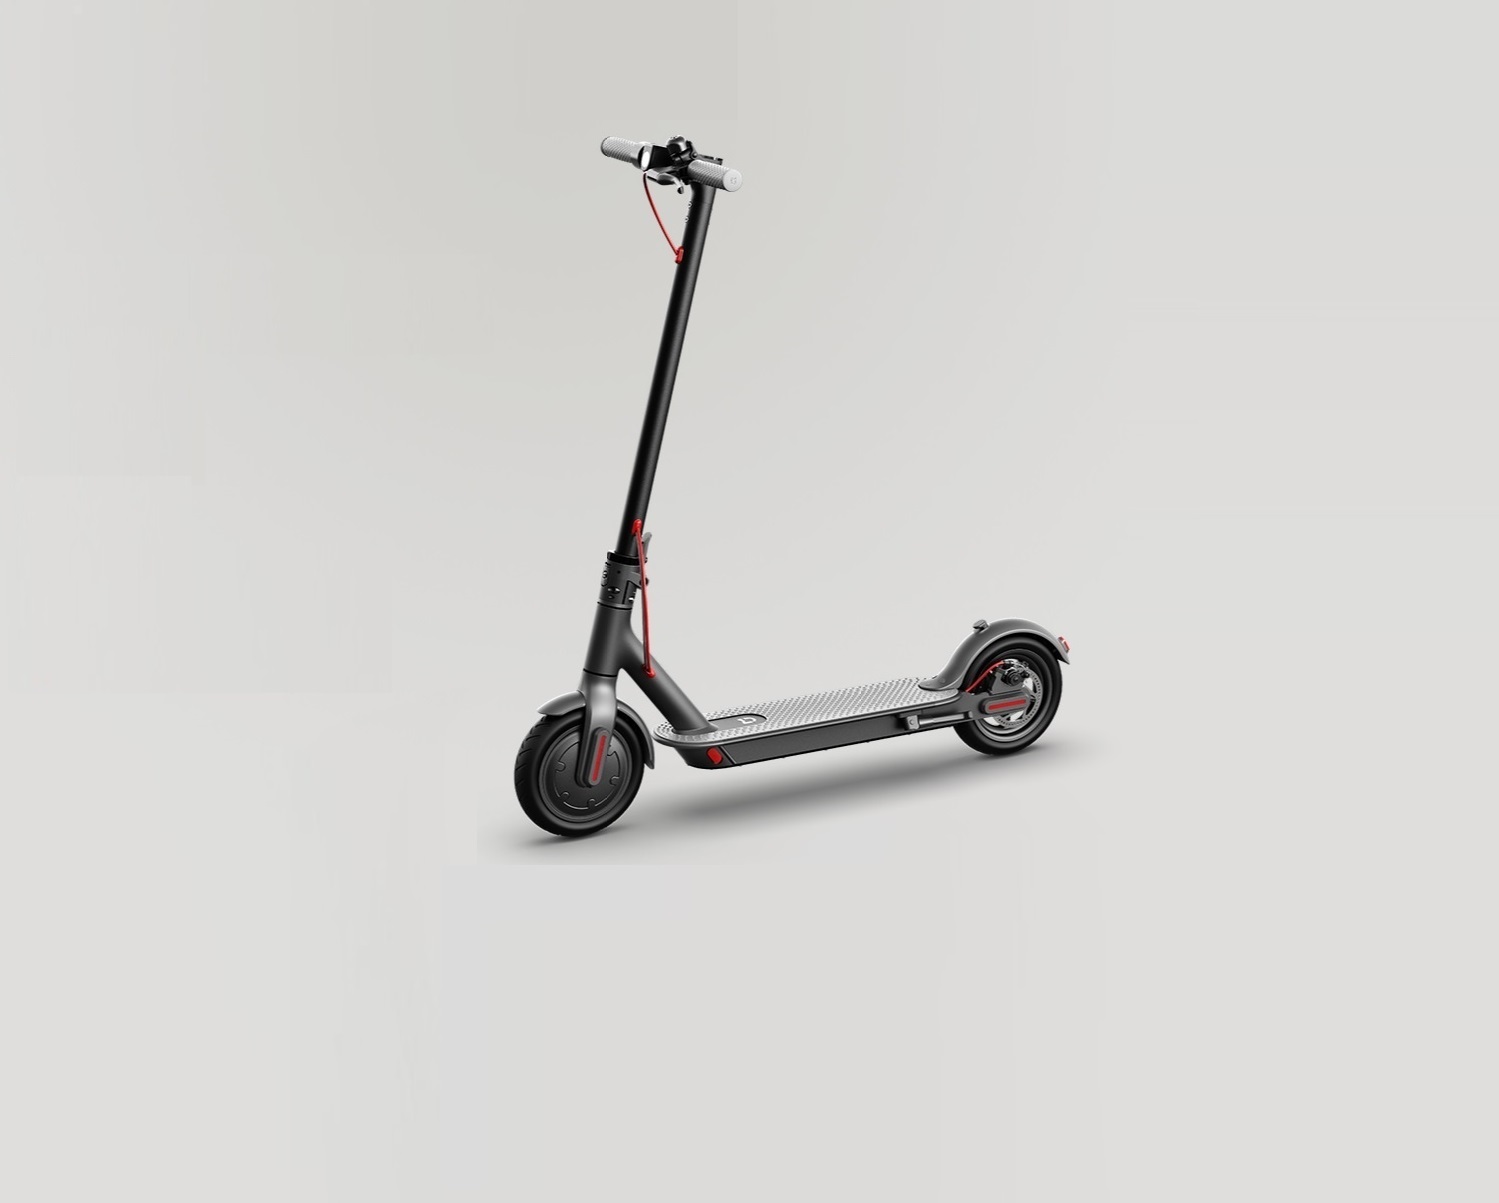 Xiaomi mijia electric scooter 1s. Электросамокат Xiaomi Mijia 1s. Xiaomi Mijia 1s самокат. Xiaomi Mijia Electric Scooter m365. Самокат Xiaomi Scooter 1s.